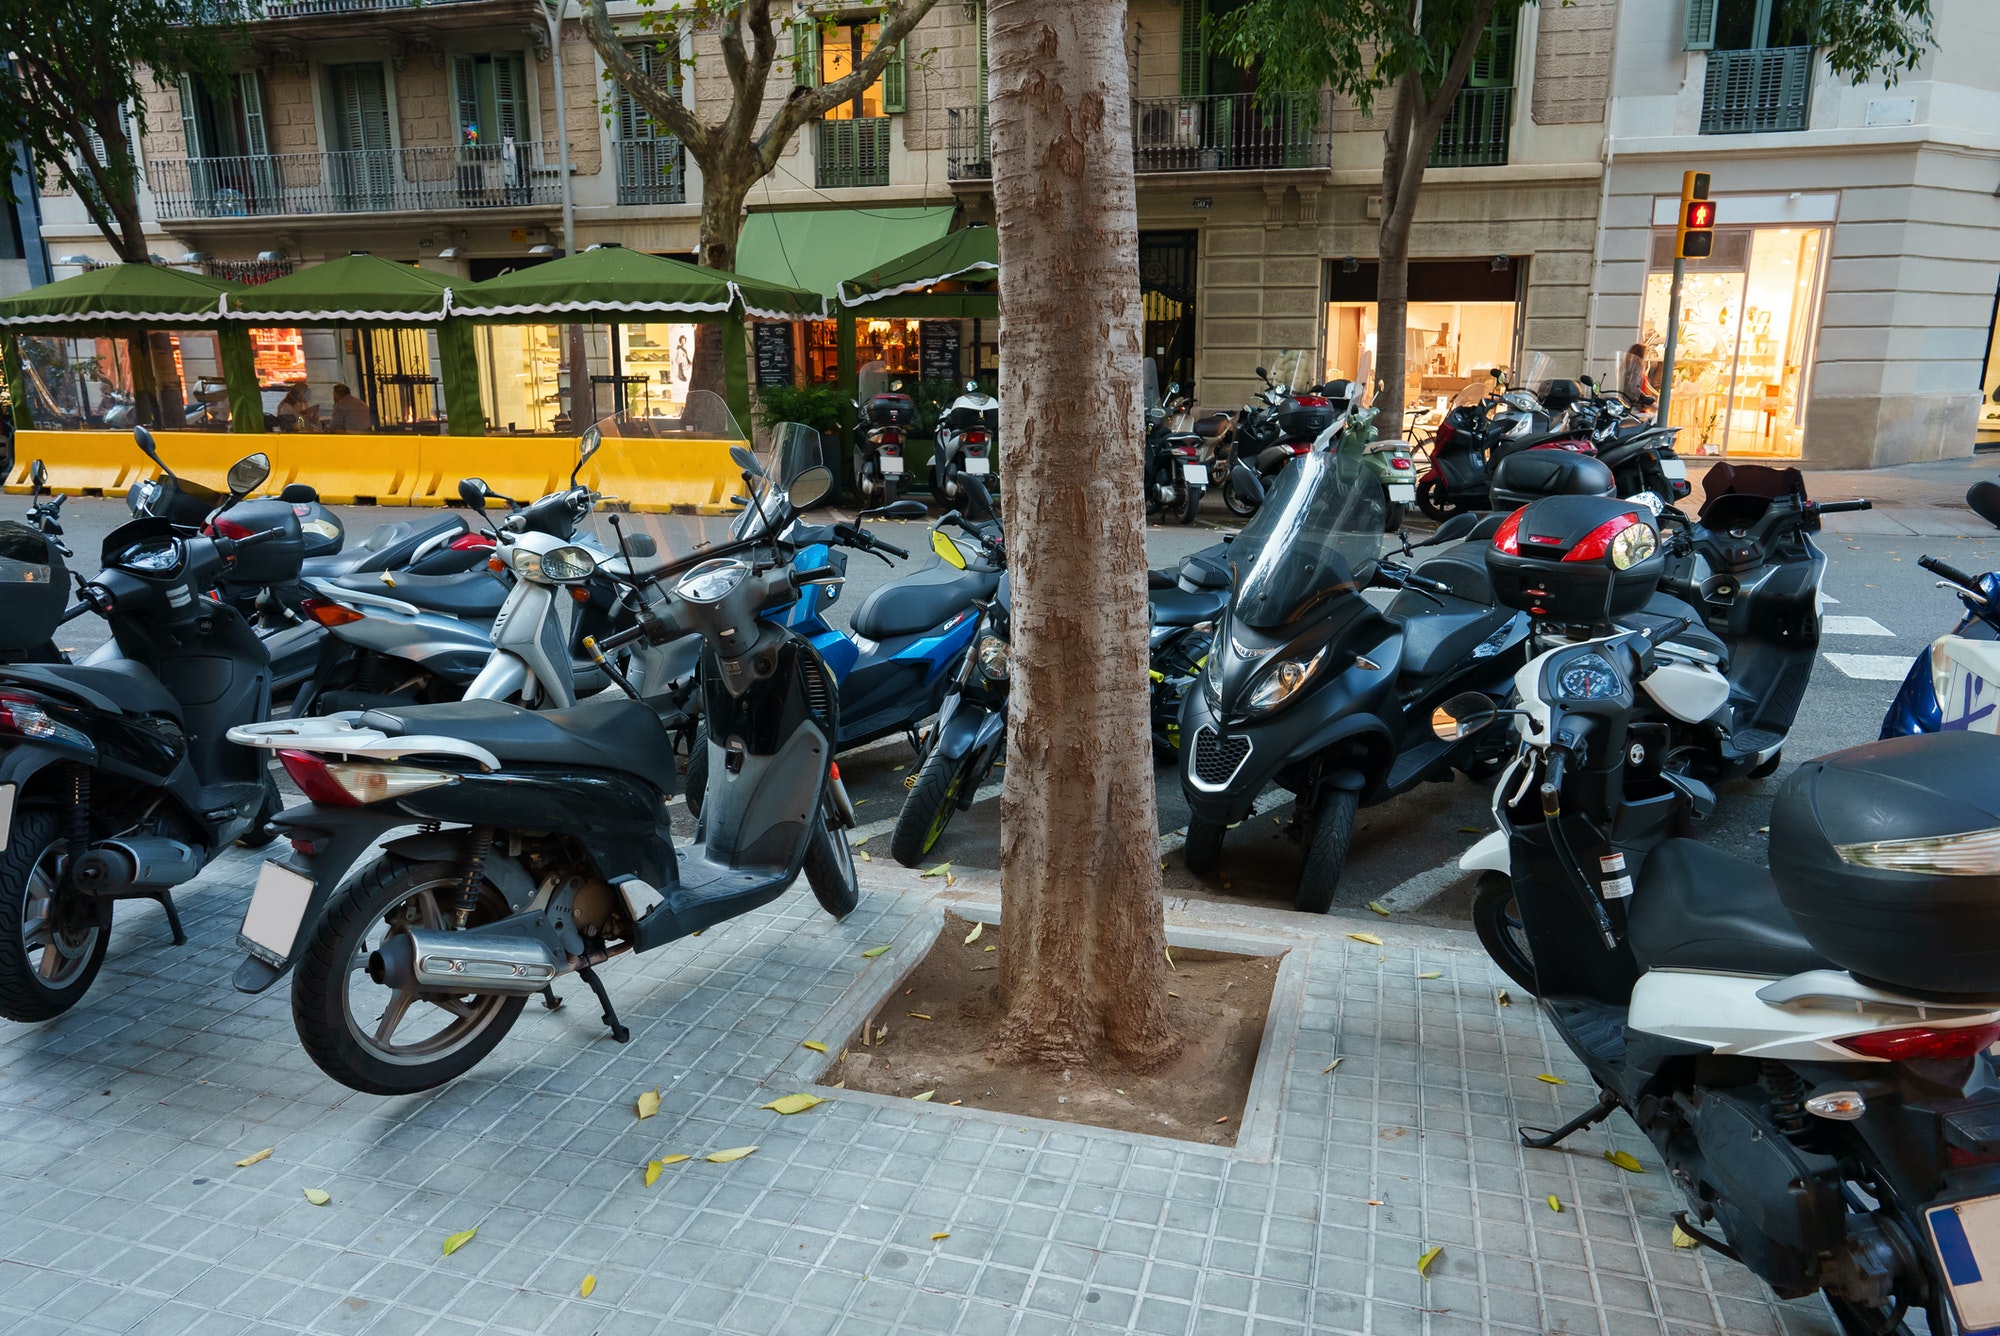 Motorbikes parked in city street